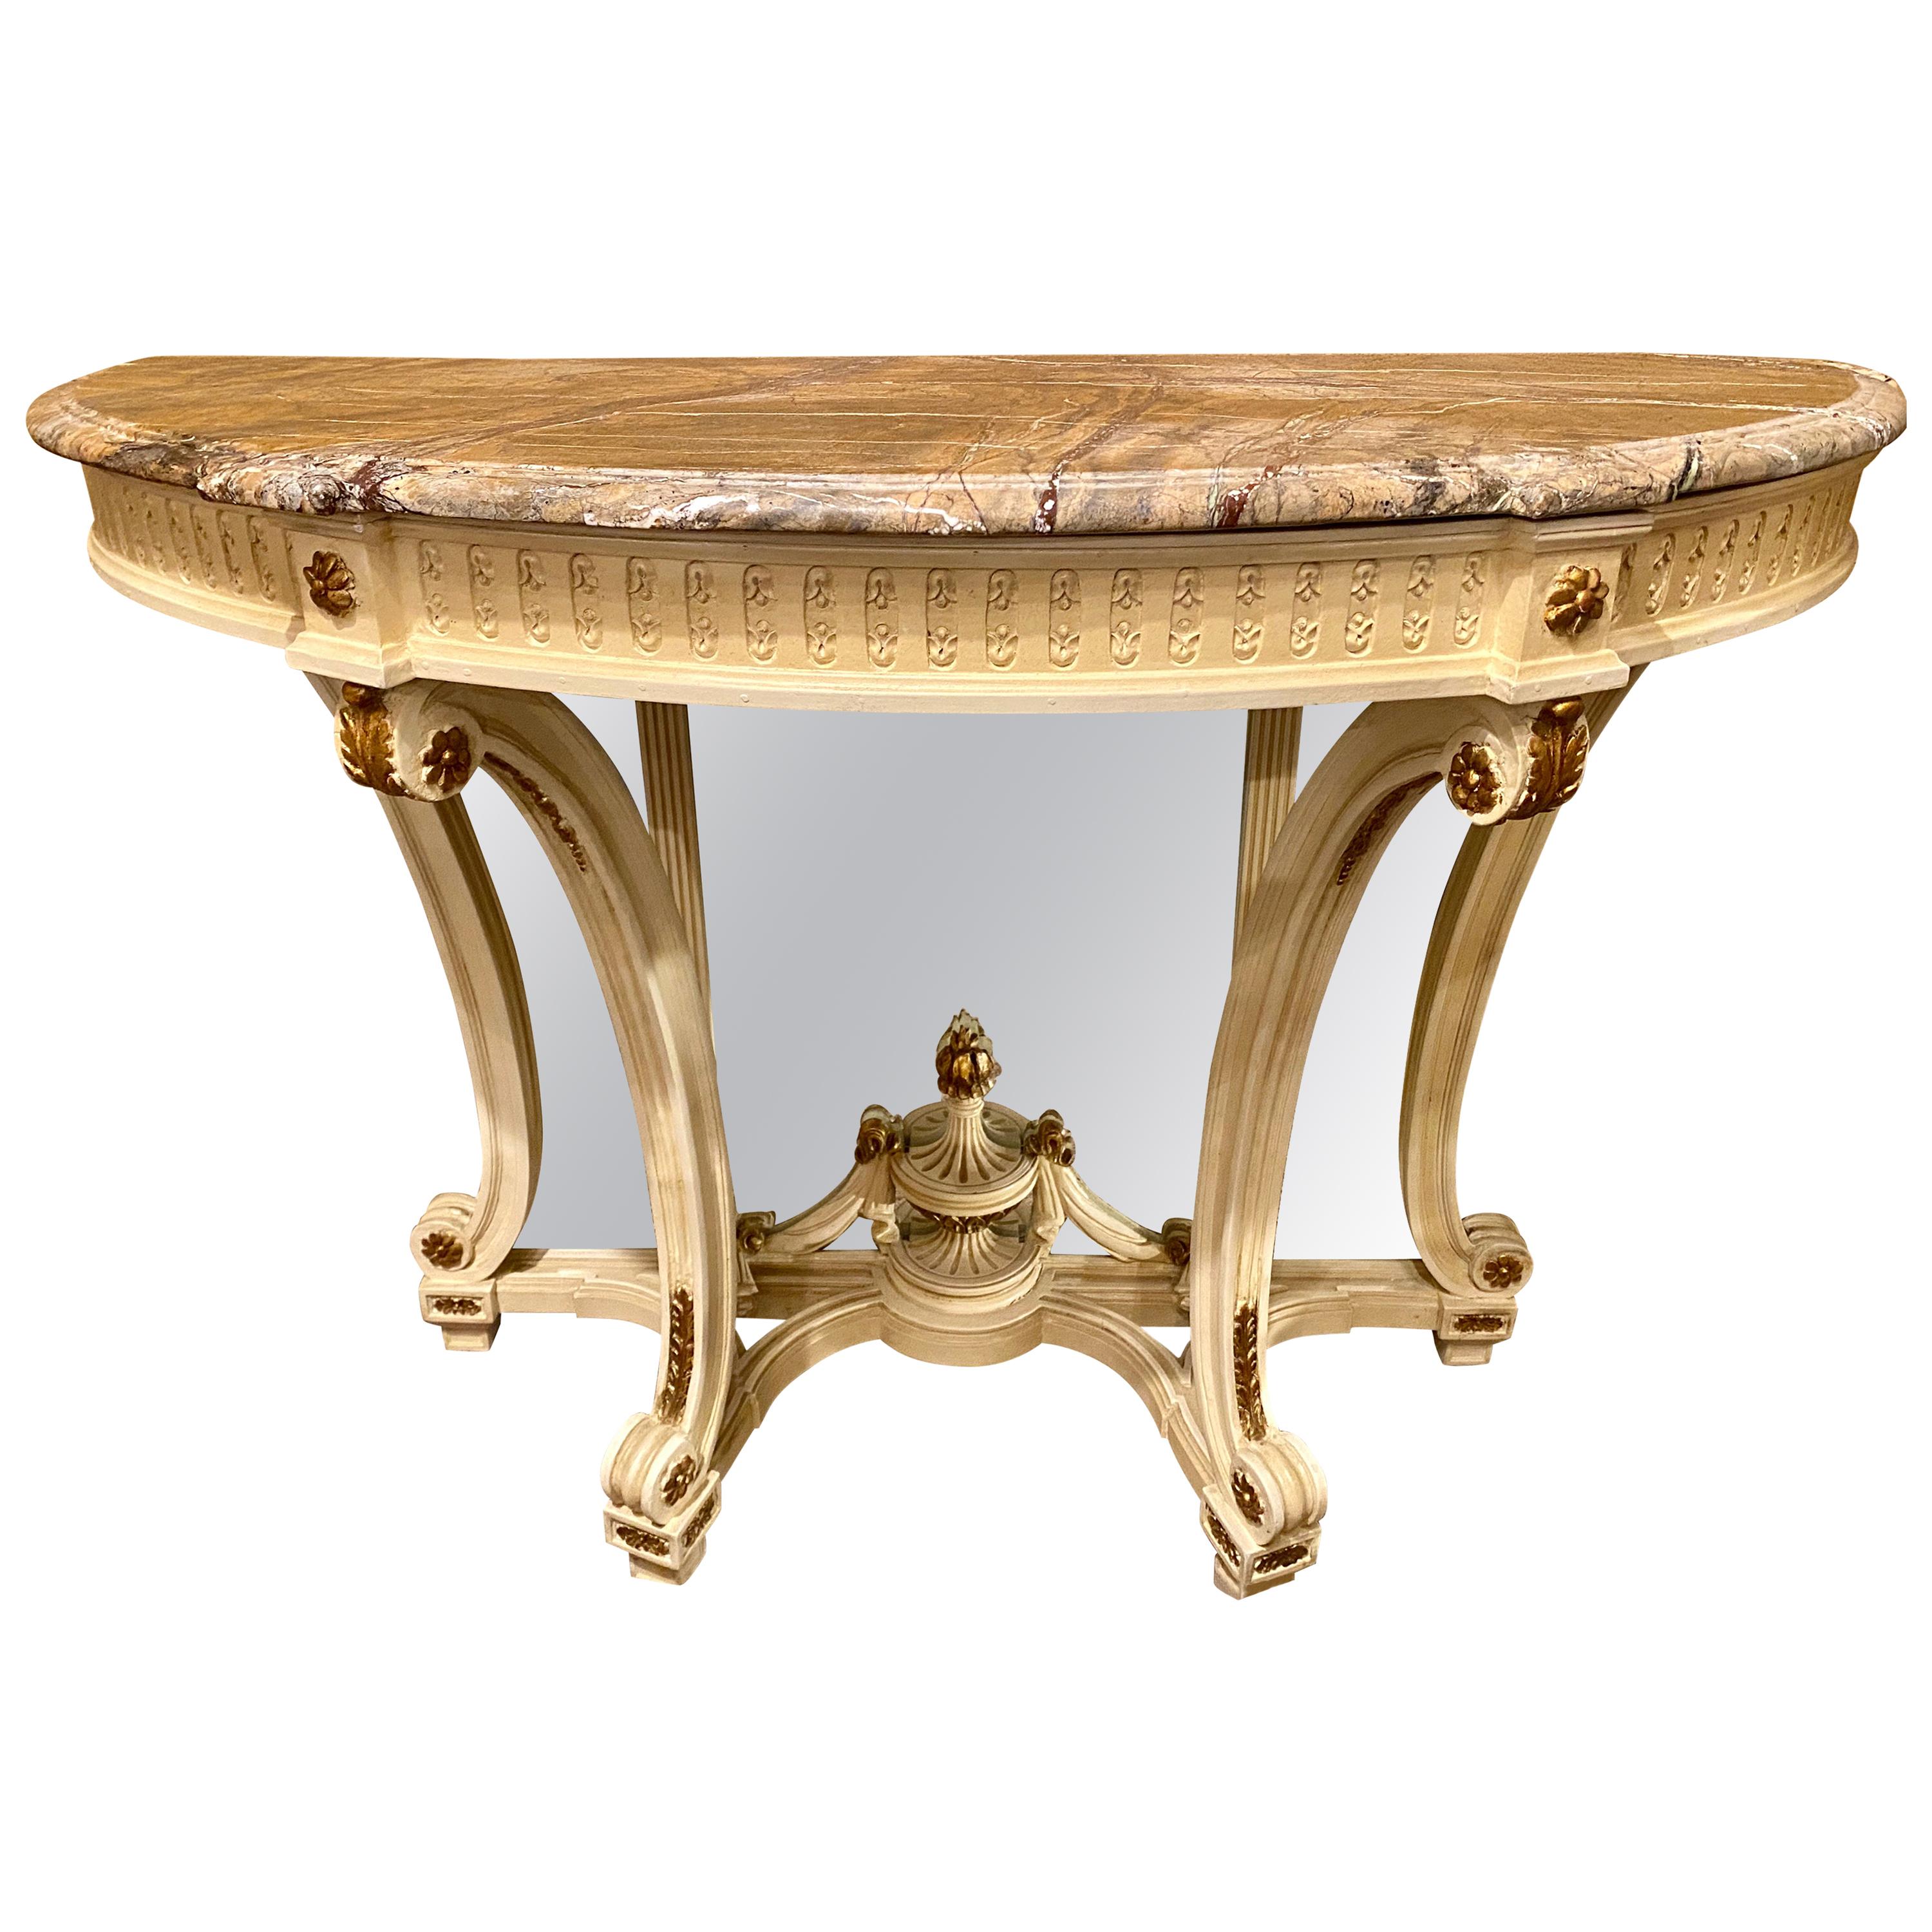 Demilune Console Hollywood Regency Style Marble-Top with Beveled Mirror Back